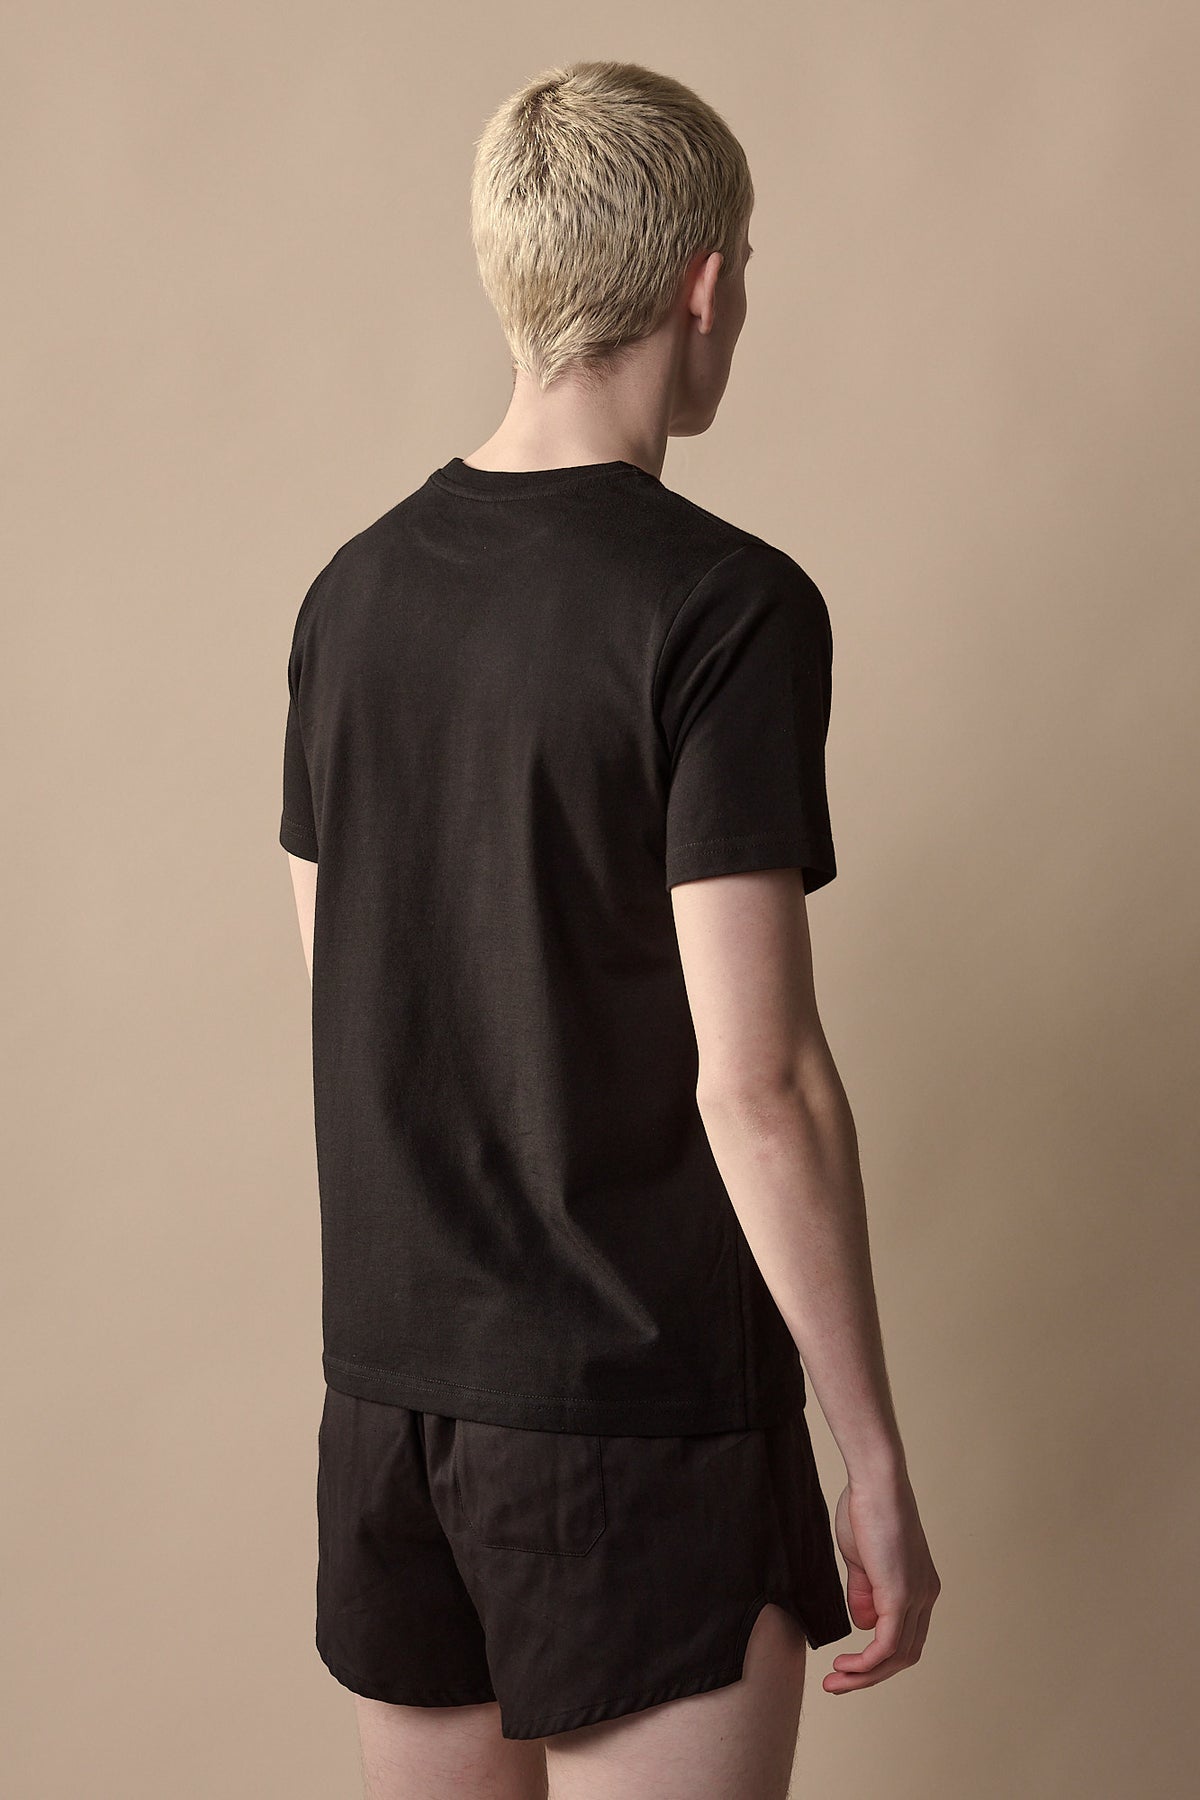 
            Thigh up image of the back of white male wearing short sleeve t shirt plastic free in black 